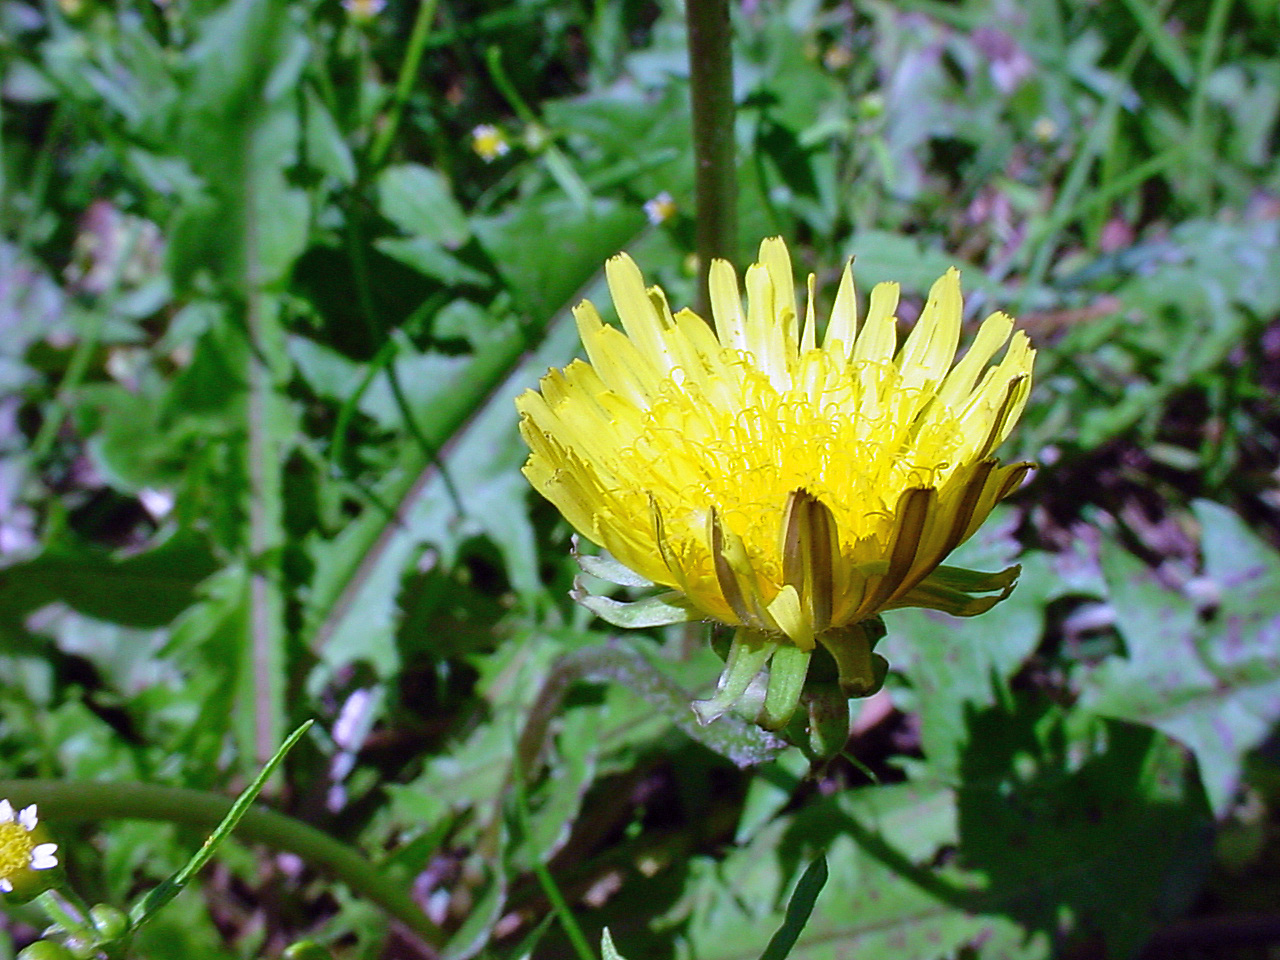 Side view of yellow flower and involucre beneath the flower